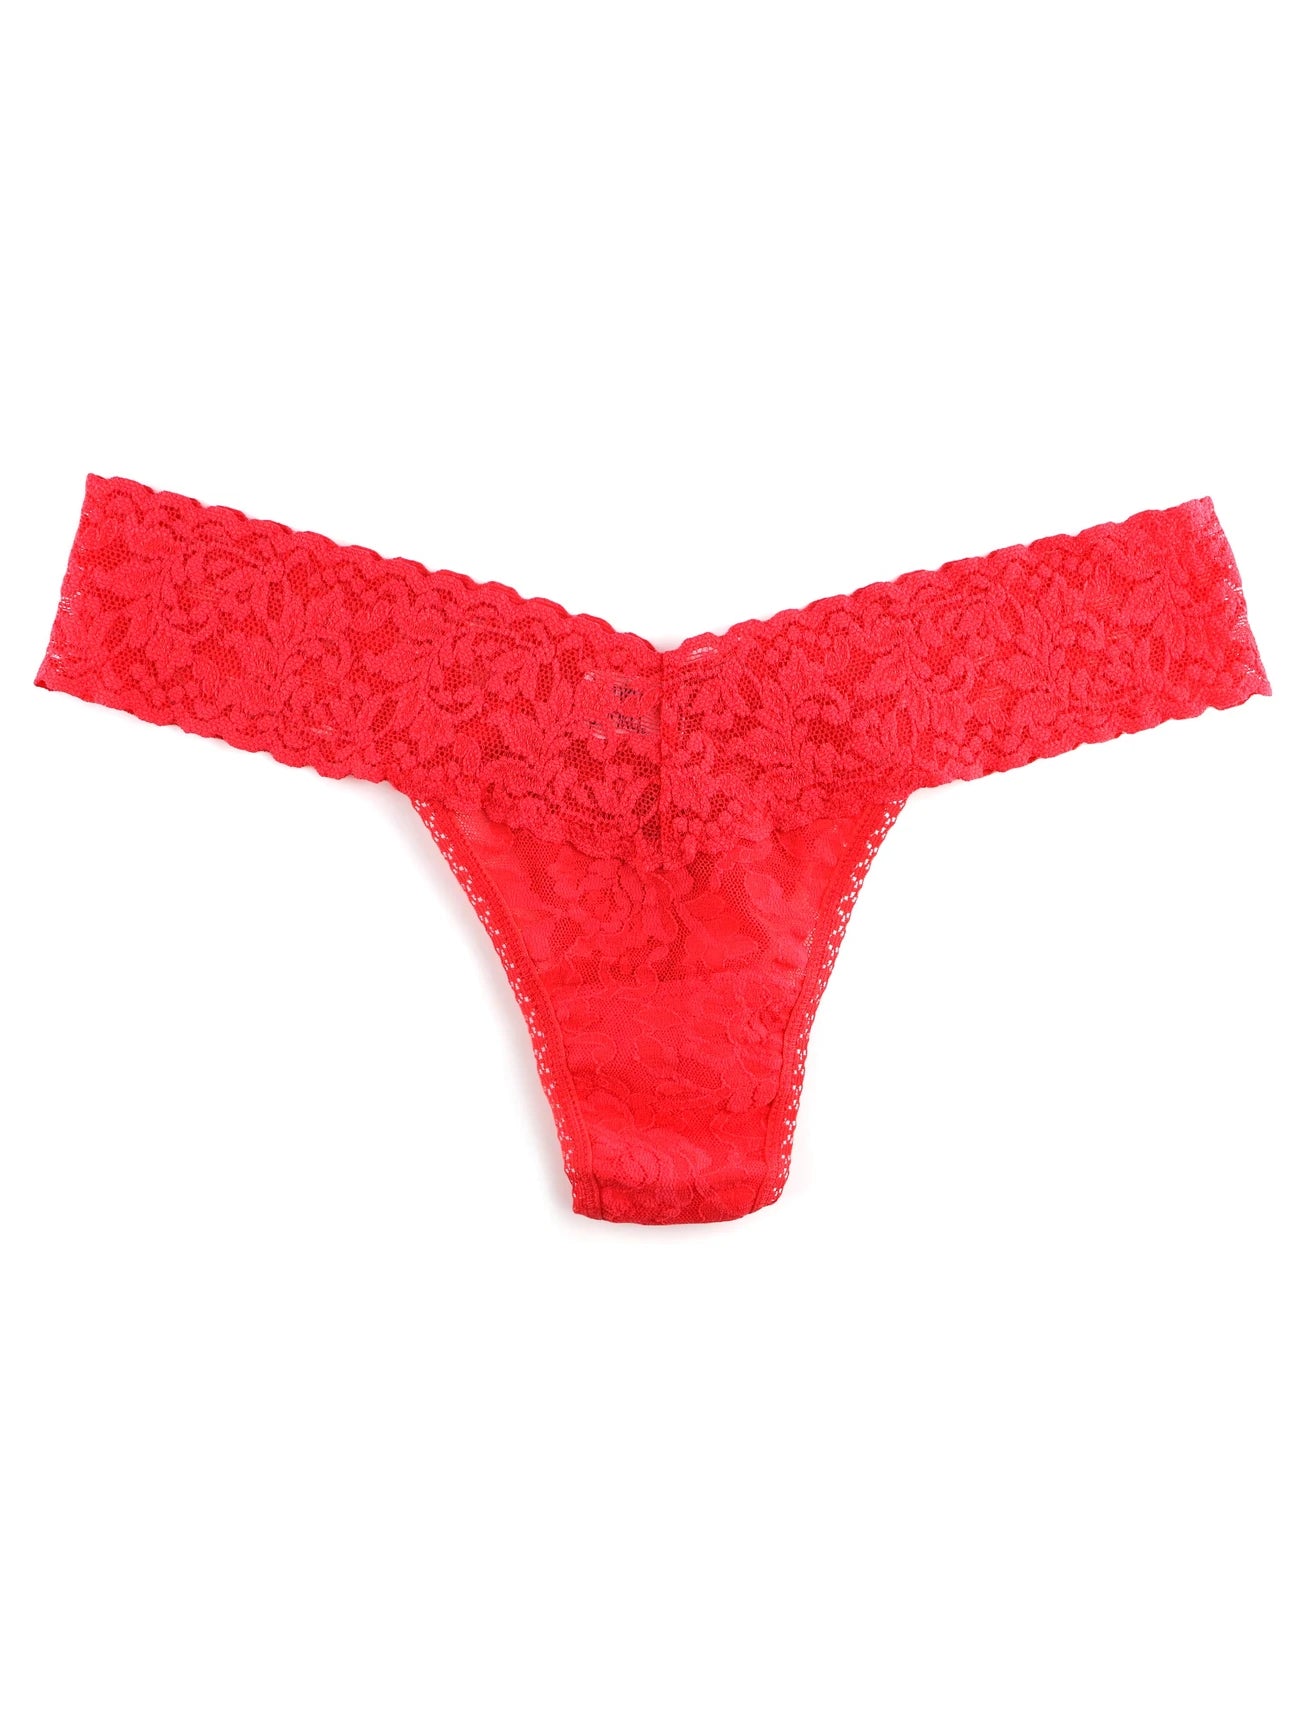 Buy deep-sea-coral Hanky Panky Signature Lace Low Rise Thong - Packaged 4911p